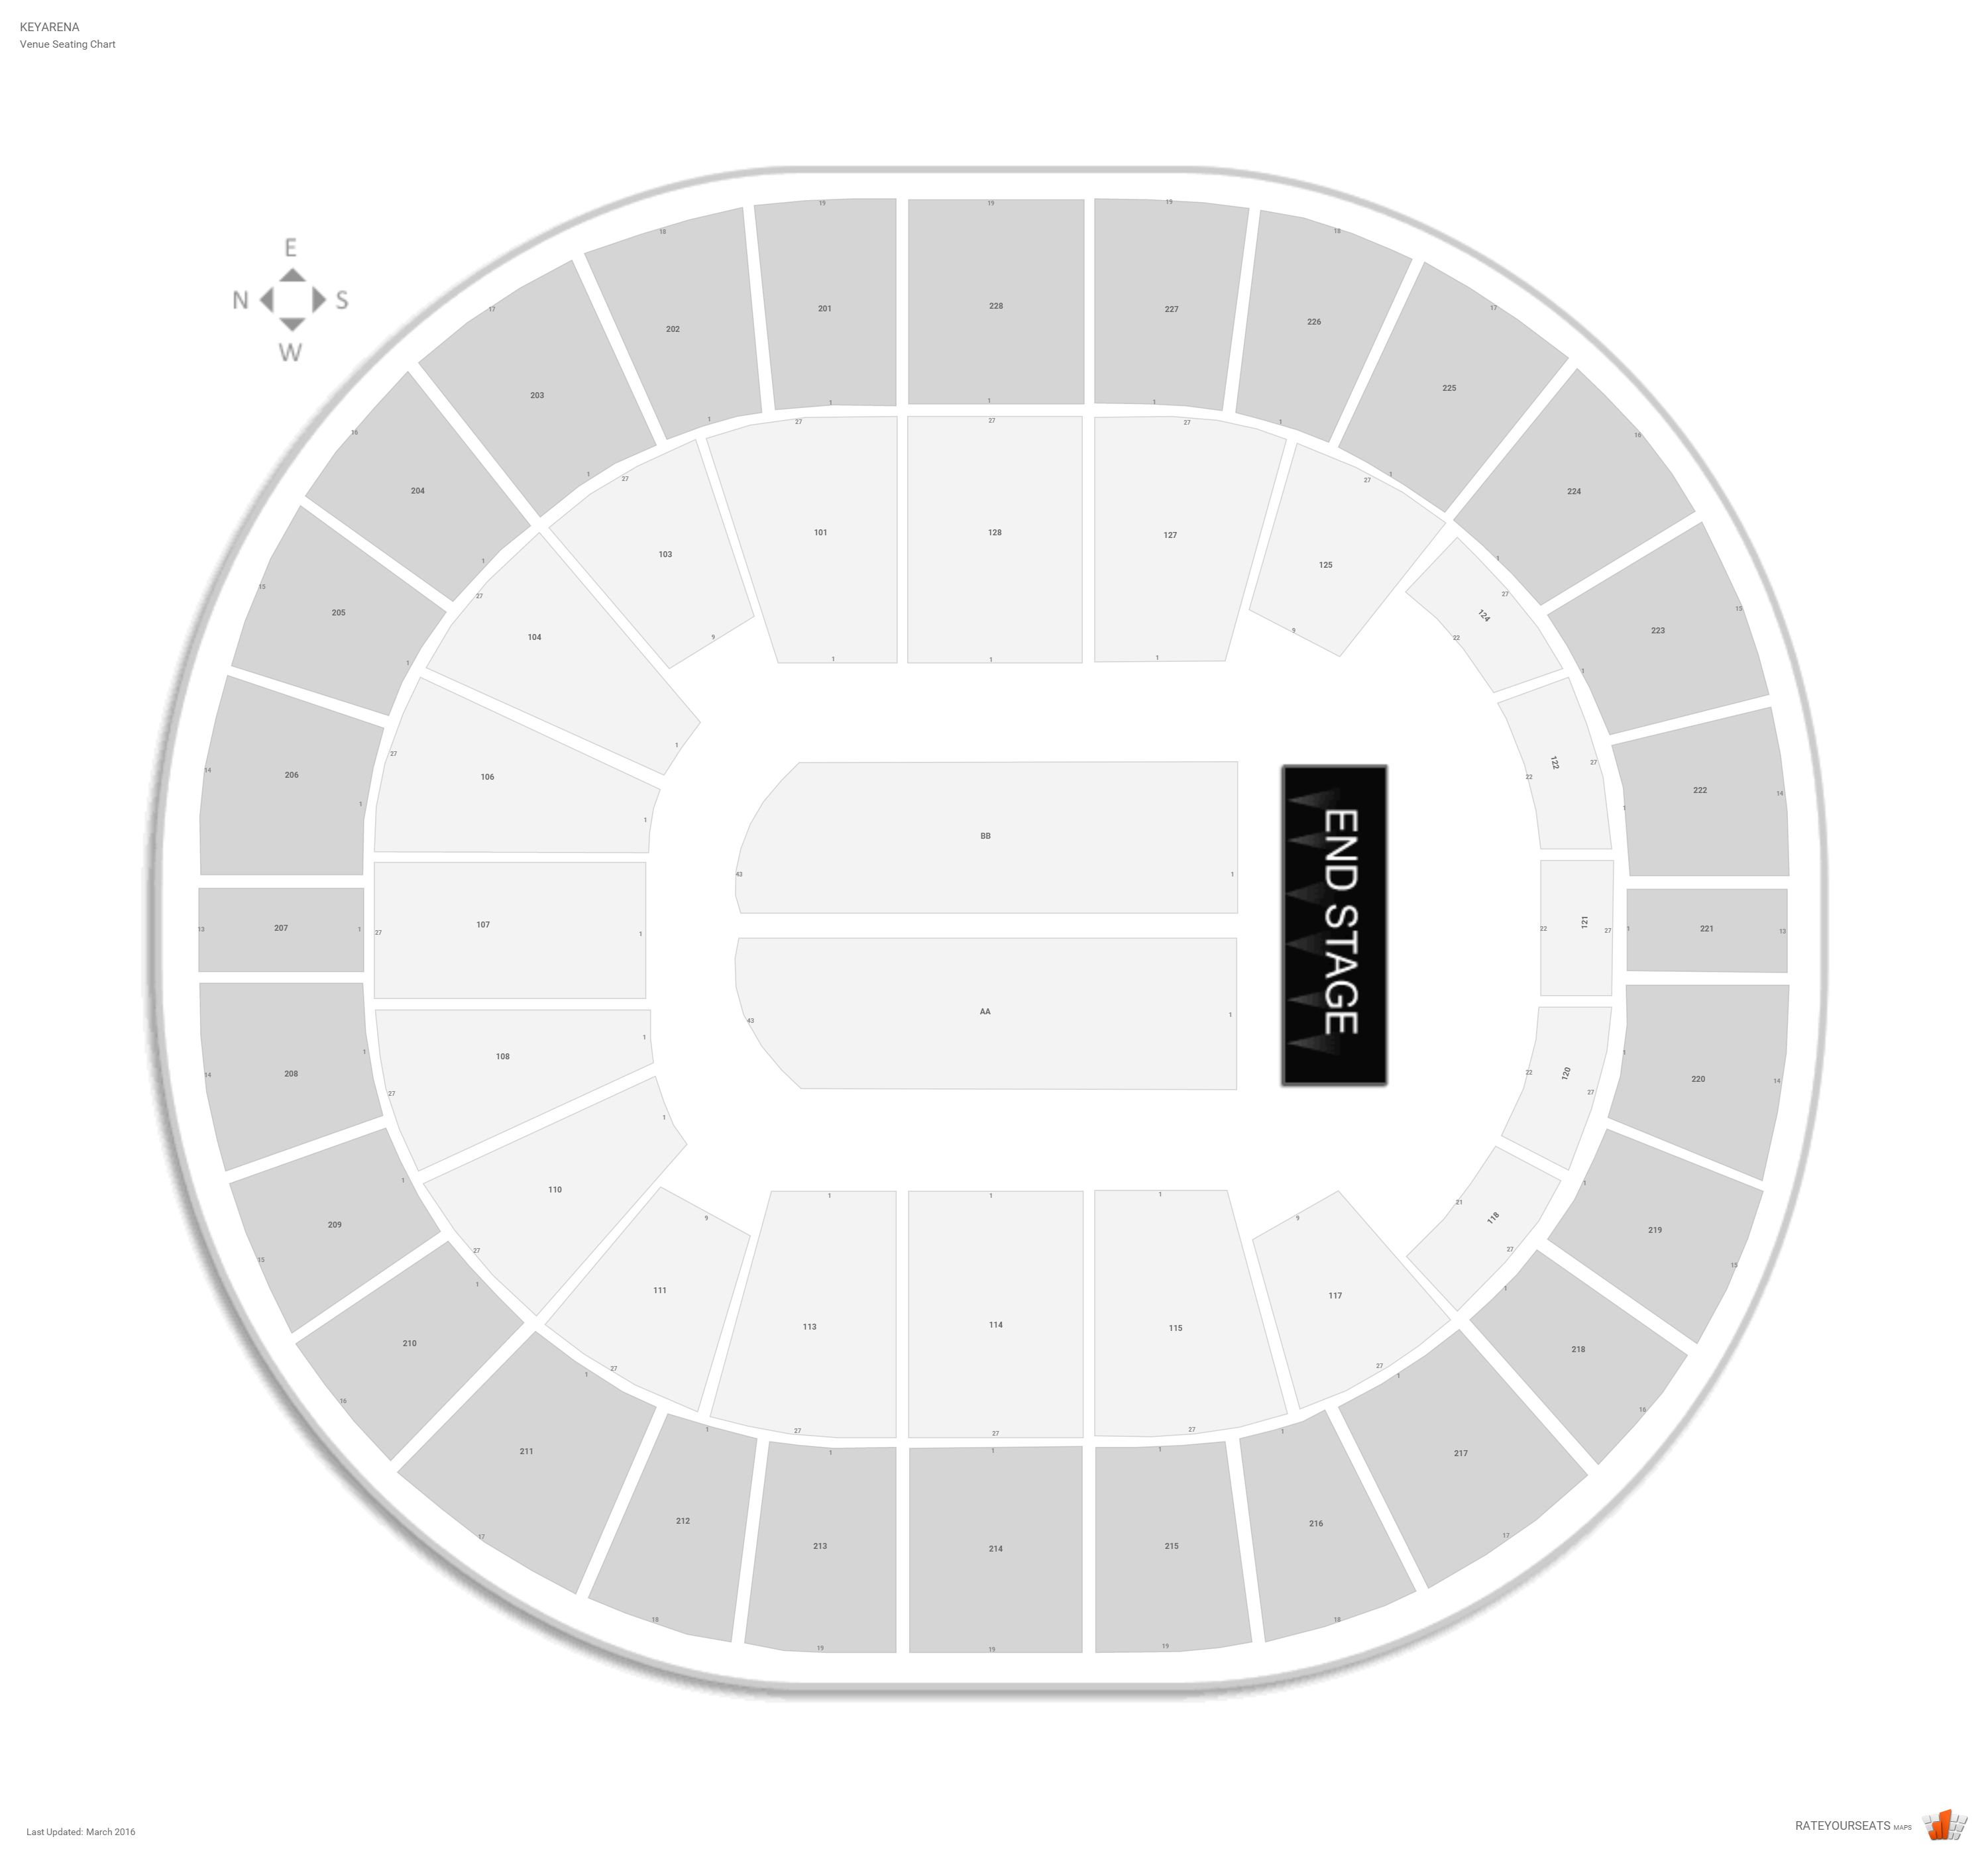 Key Arena Seattle Concert Seating Chart